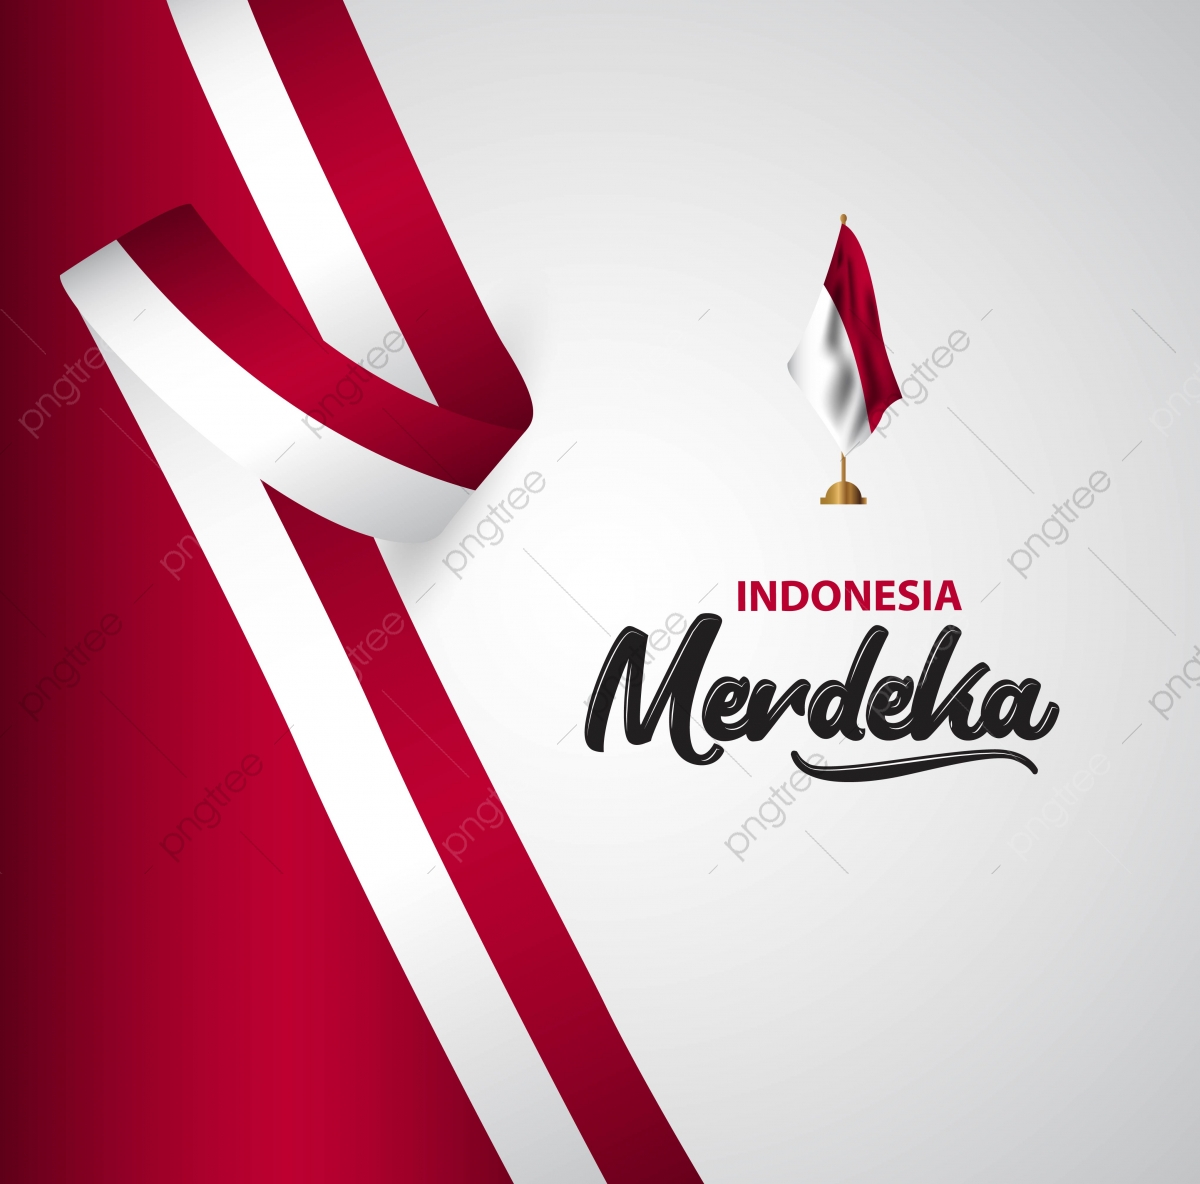 Indonesia Vector at Vectorified.com | Collection of ...